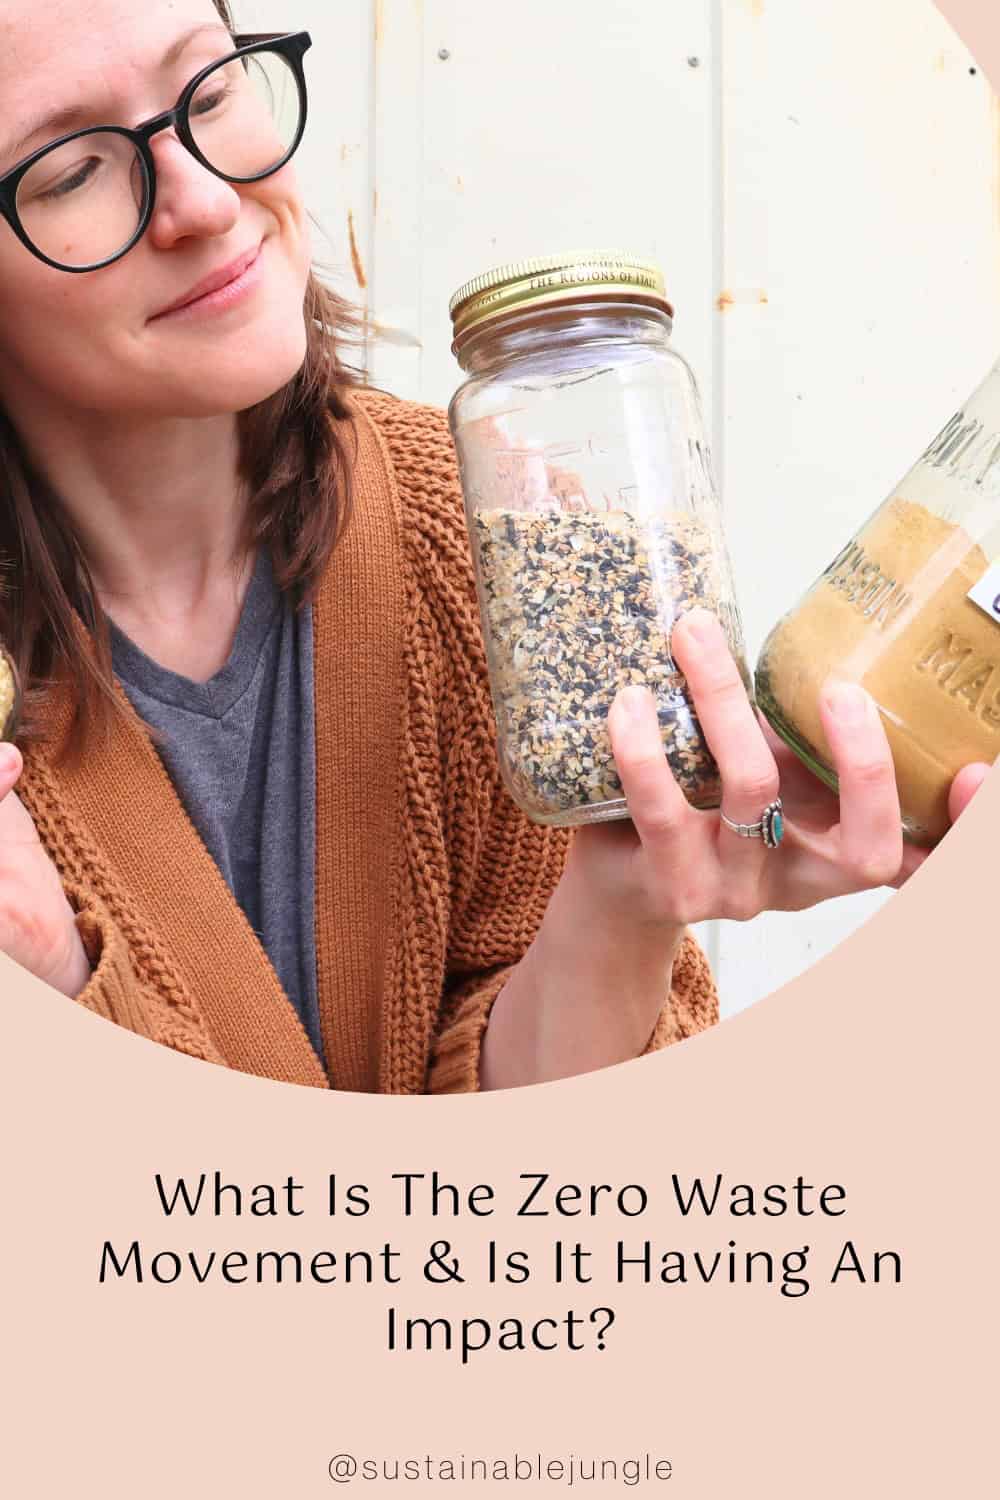 What Is The Zero Waste Movement & Is It Having An Impact? Image by Sustainable Jungle #zerowaste #zerowastemovement #zerowastecommunity #whatisthezerowastemovement #sustainablejungle